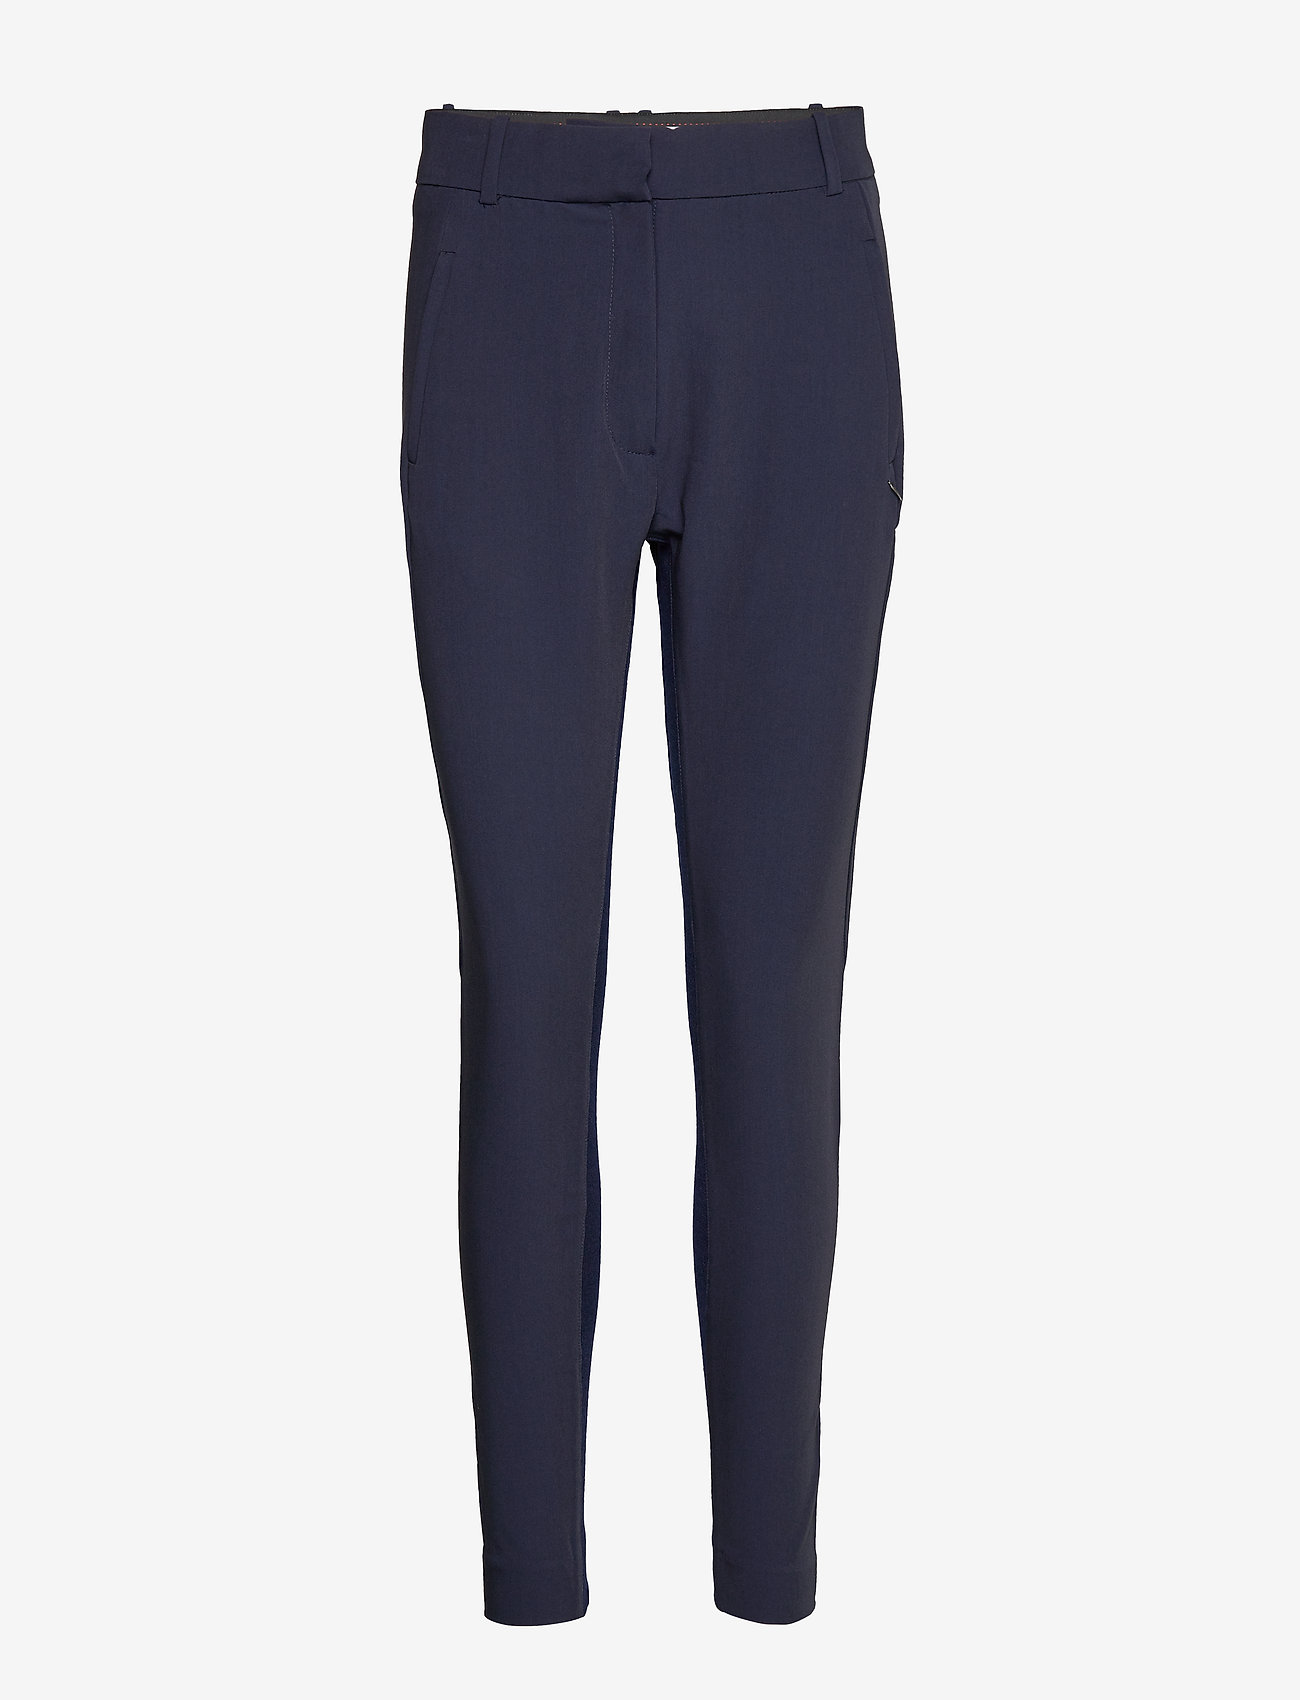 Coster Copenhagen - Suit pants - Coco - trousers with skinny legs - dark blue - 0